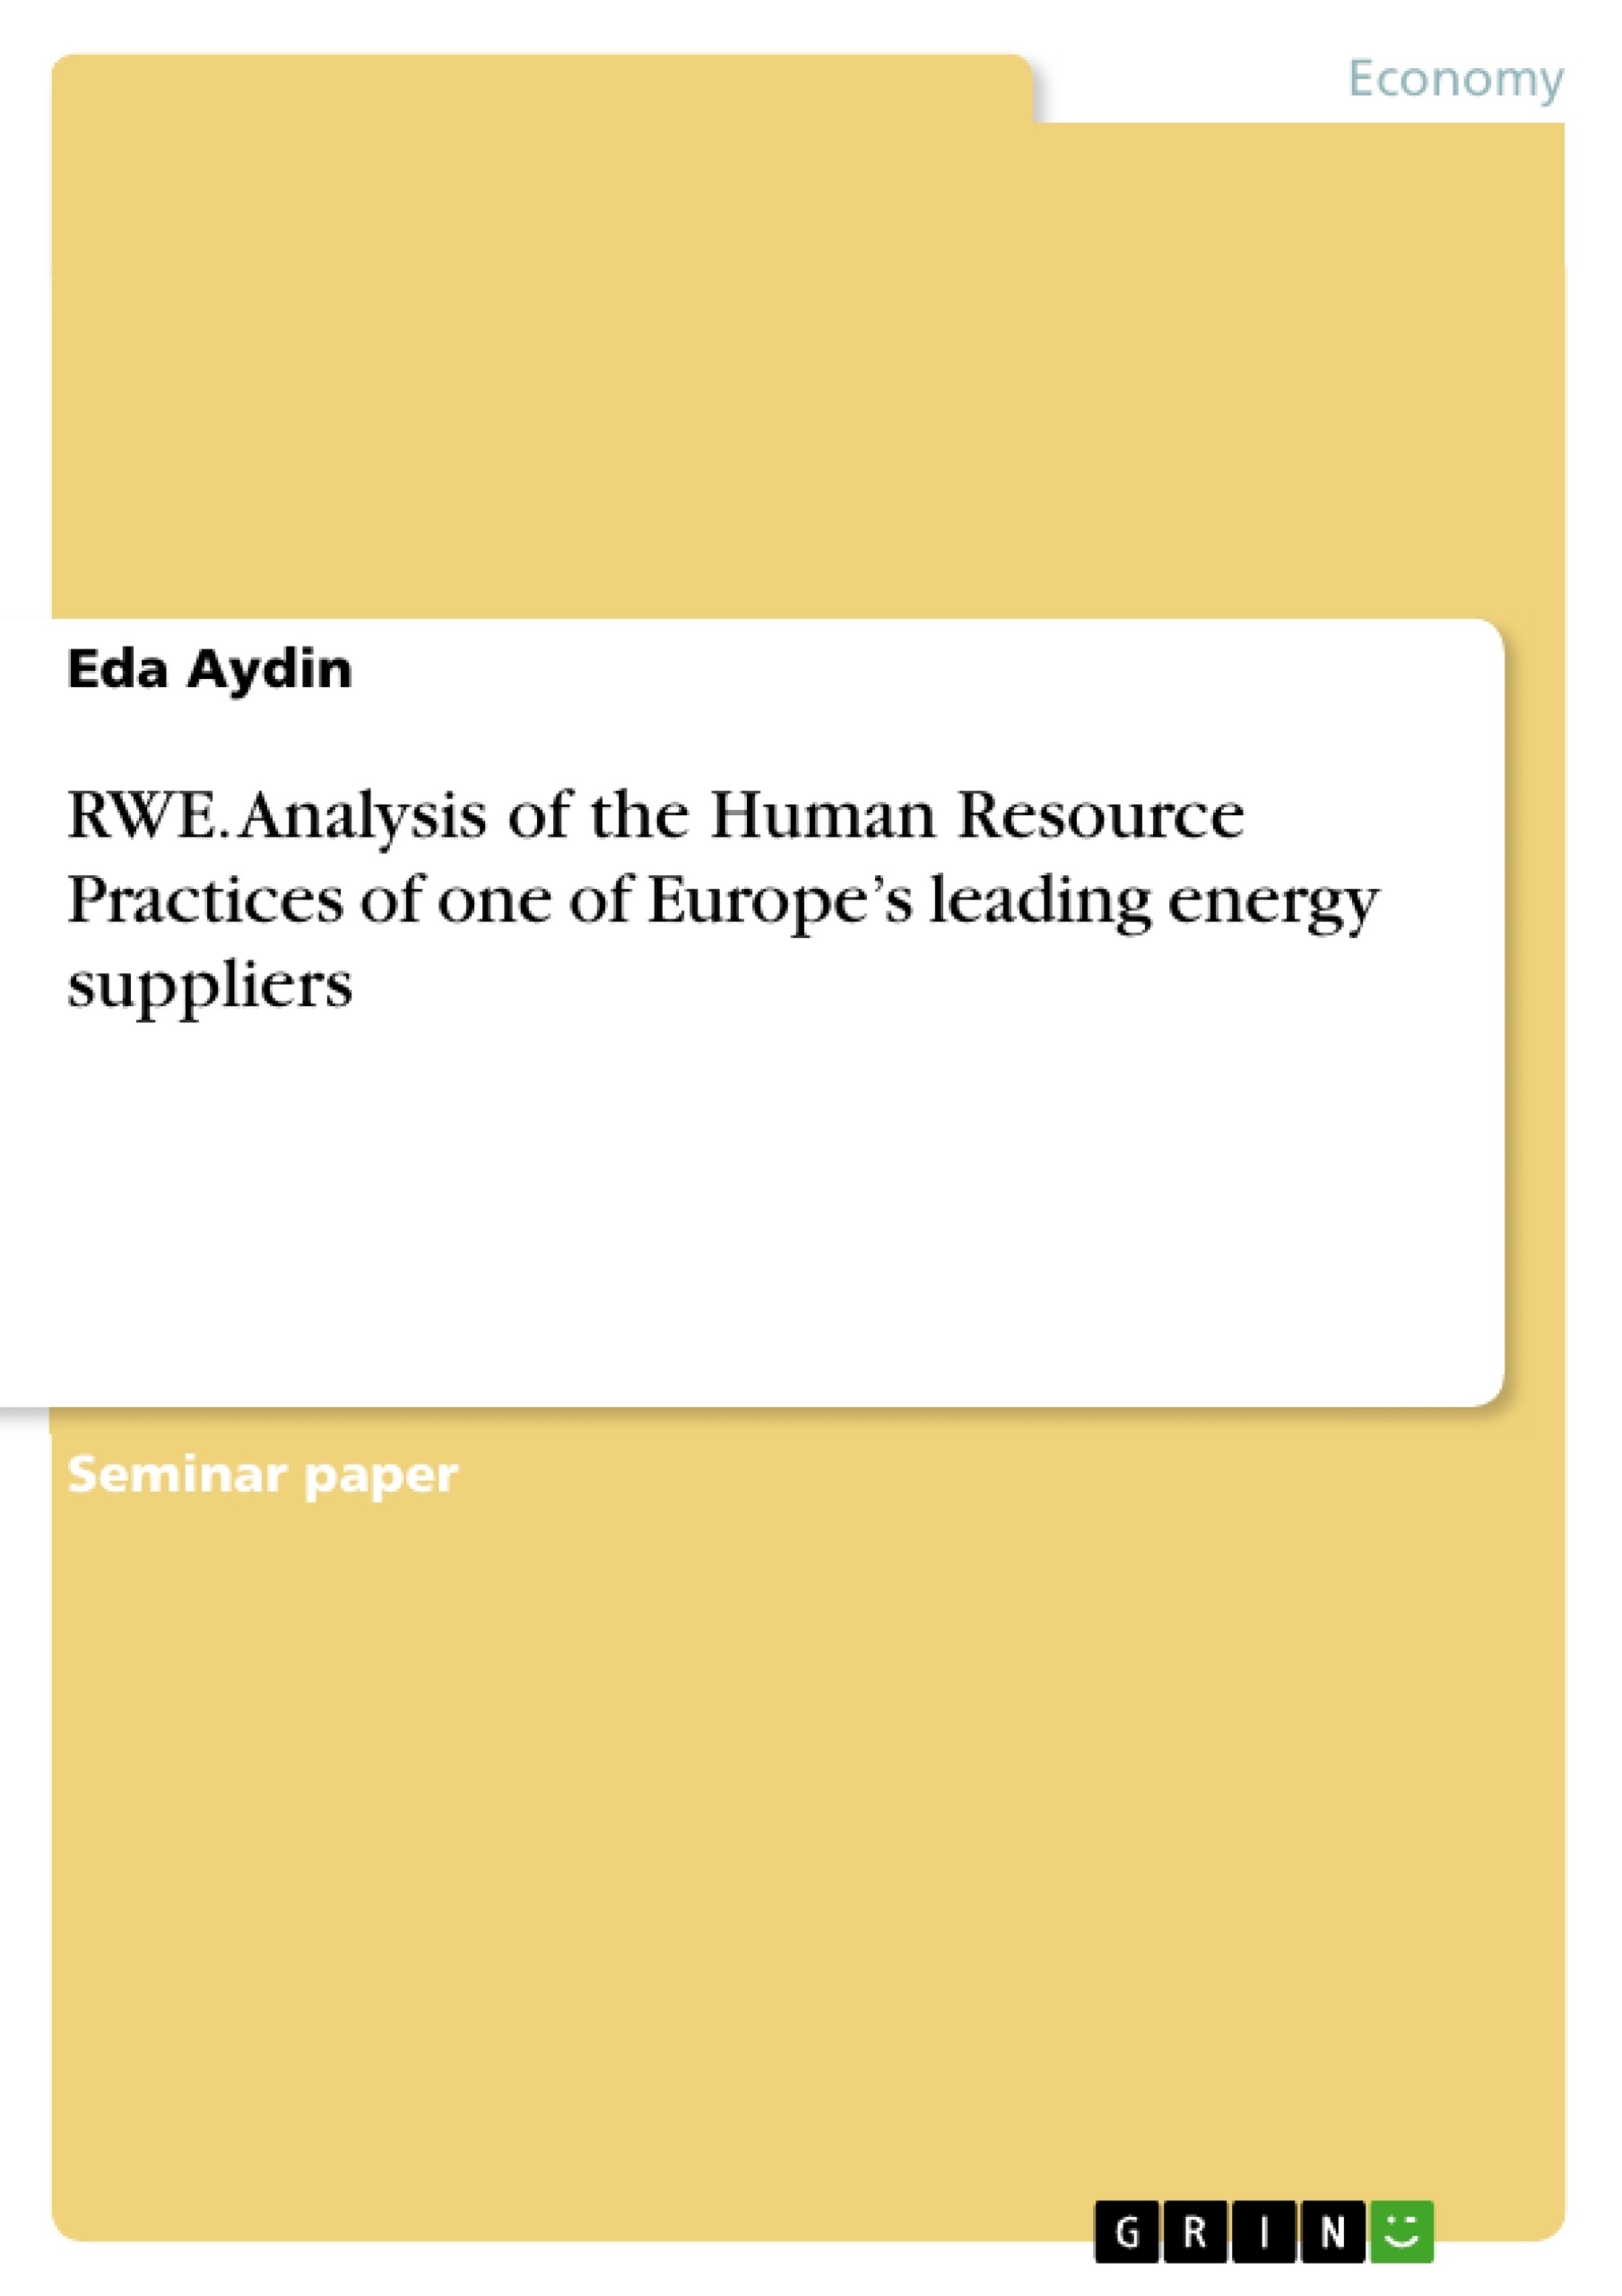 Título: RWE. Analysis of the Human Resource Practices of one of Europe’s leading energy suppliers